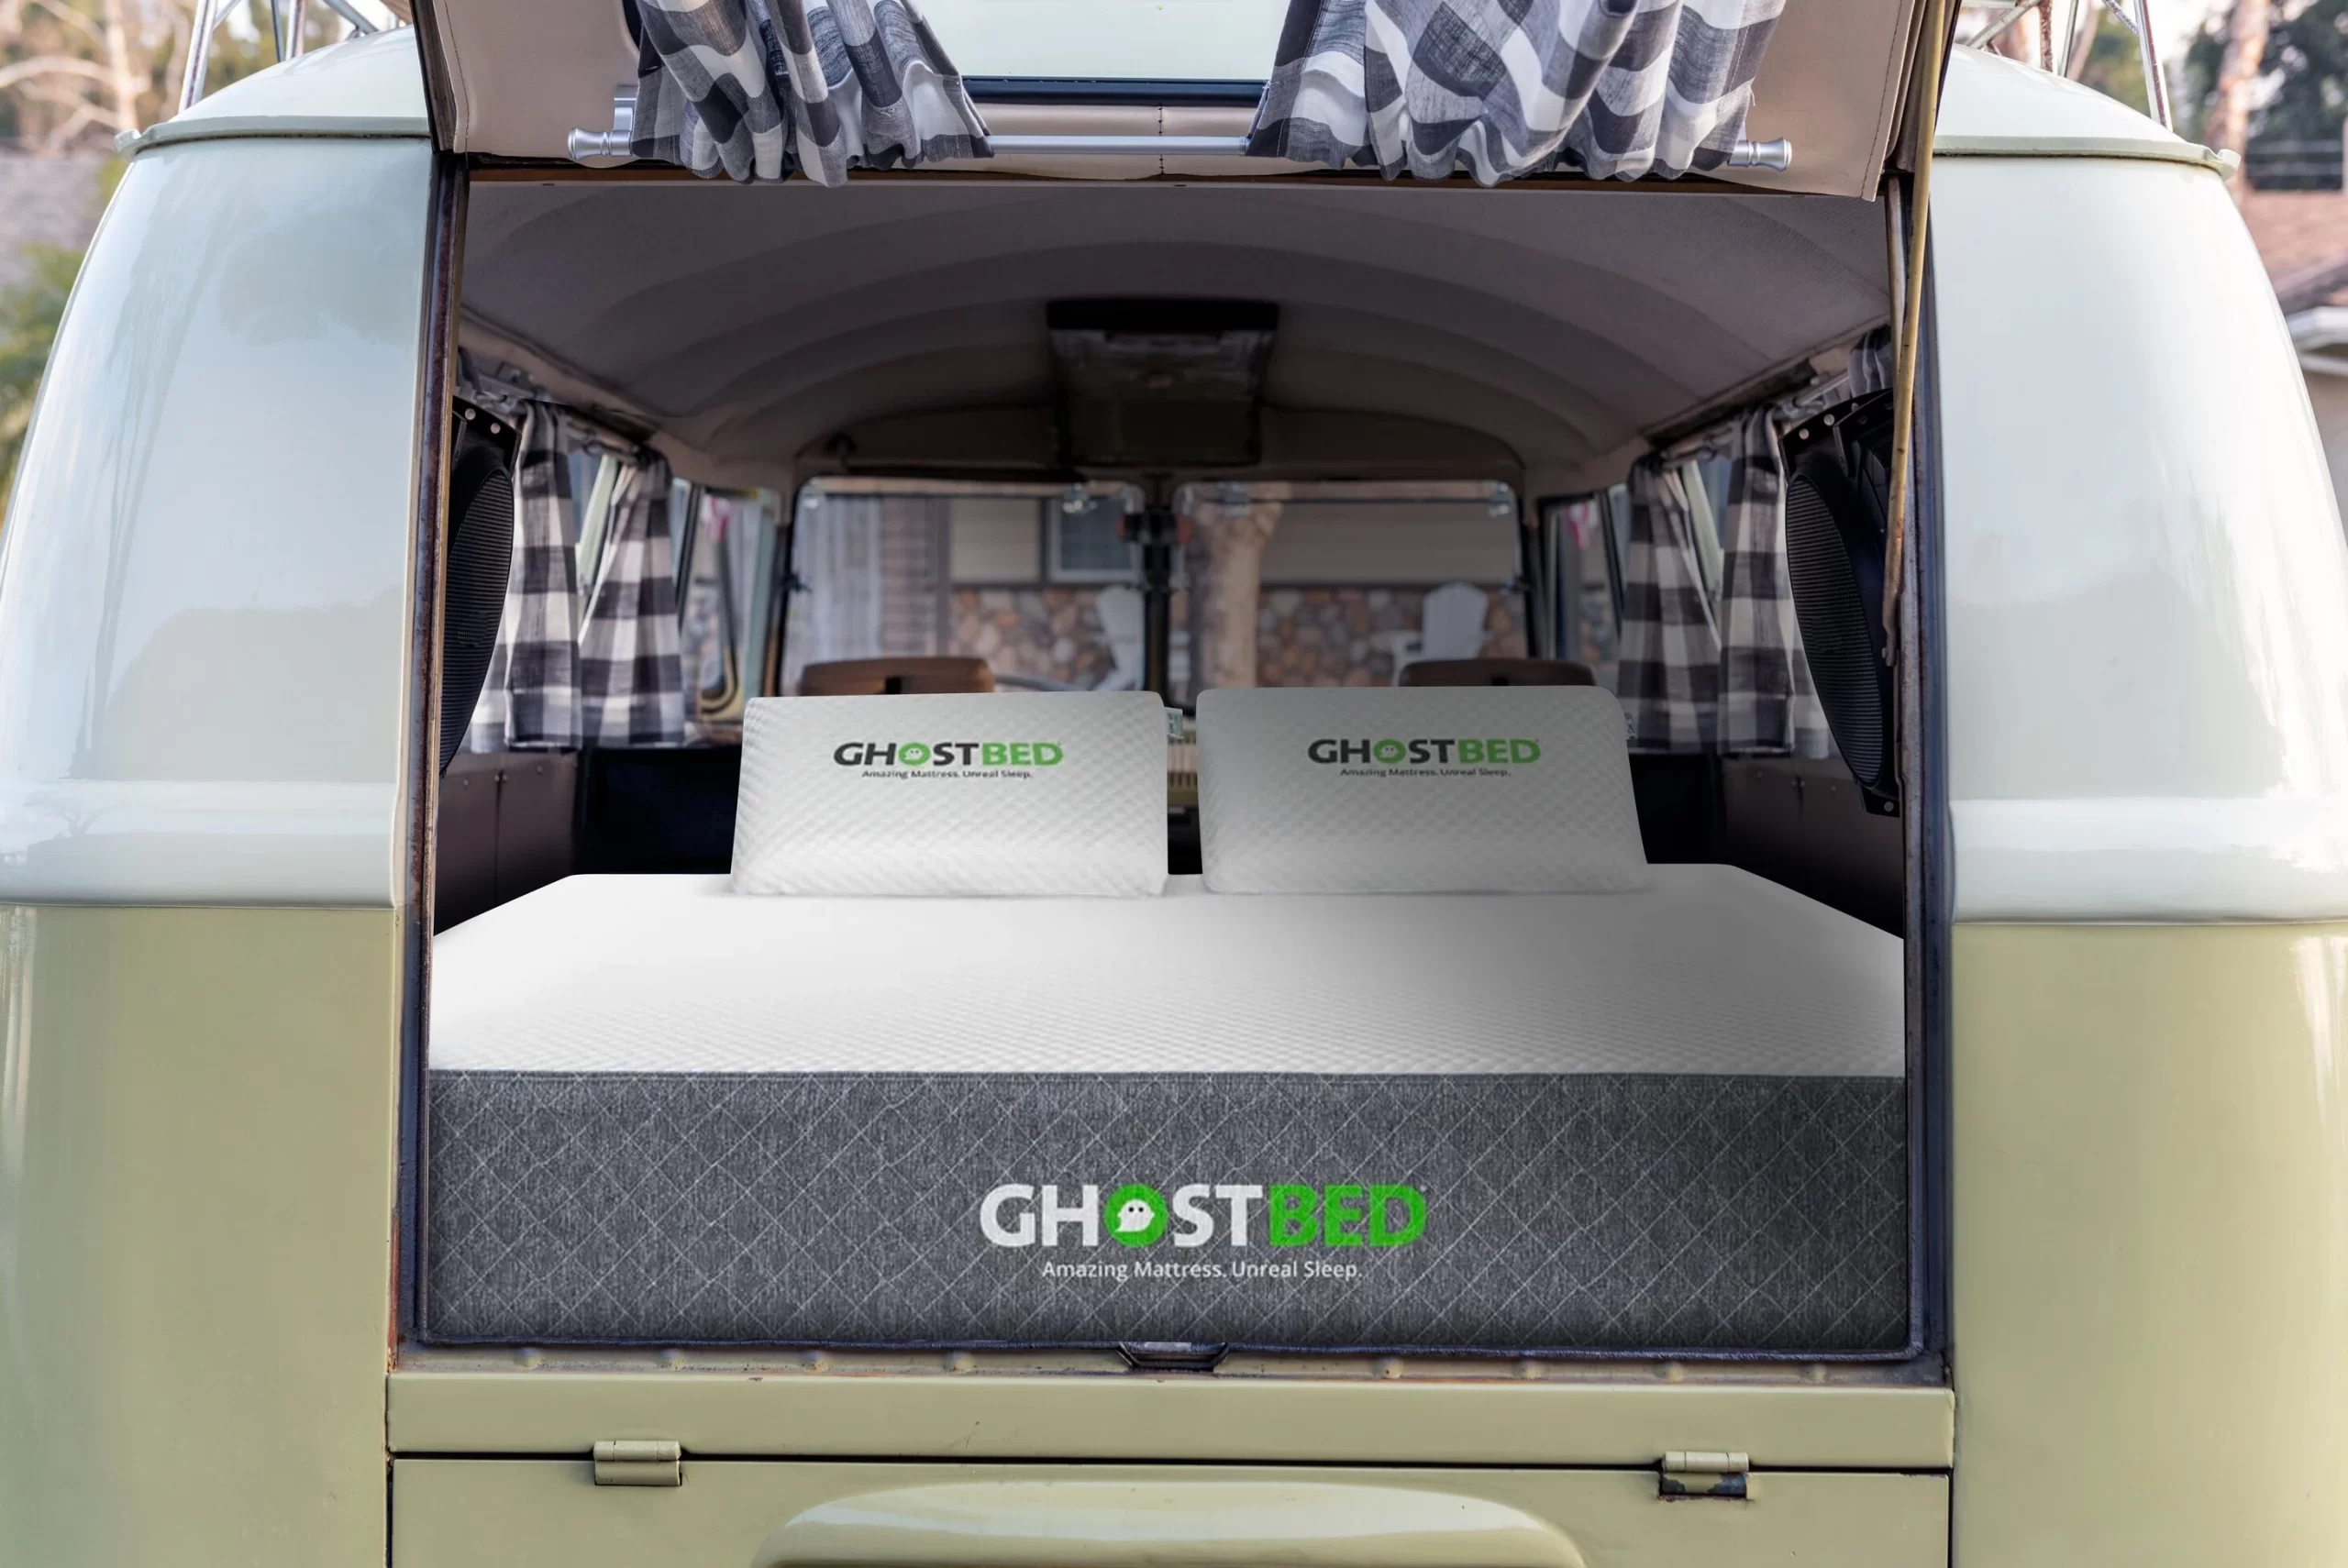 Ghostbed RV Mattress Review